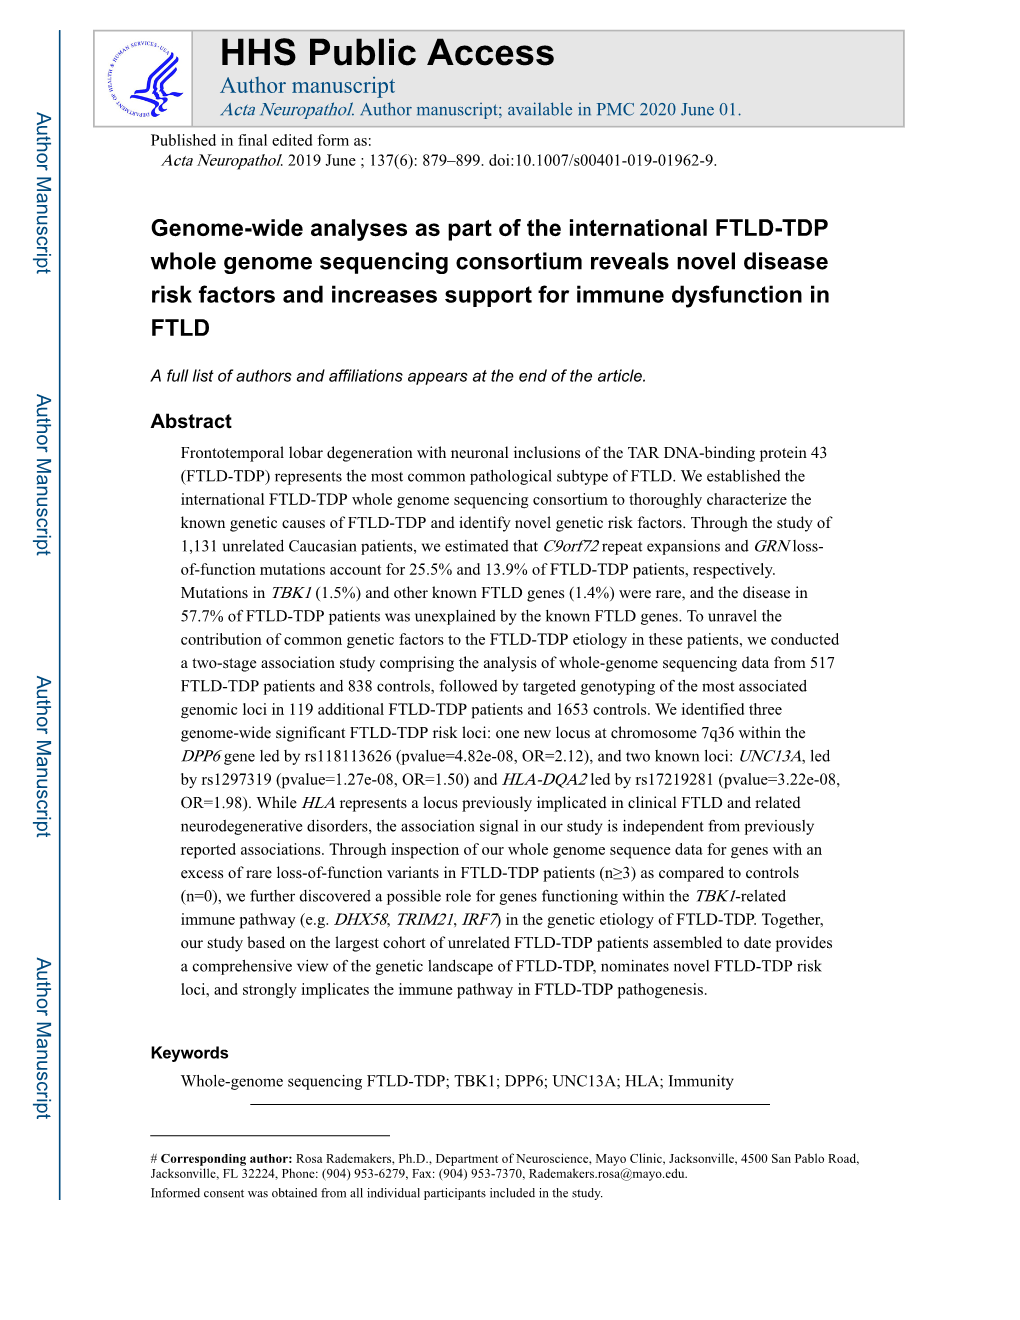 Genome-Wide Analyses As Part of the International FTLD-TDP Whole